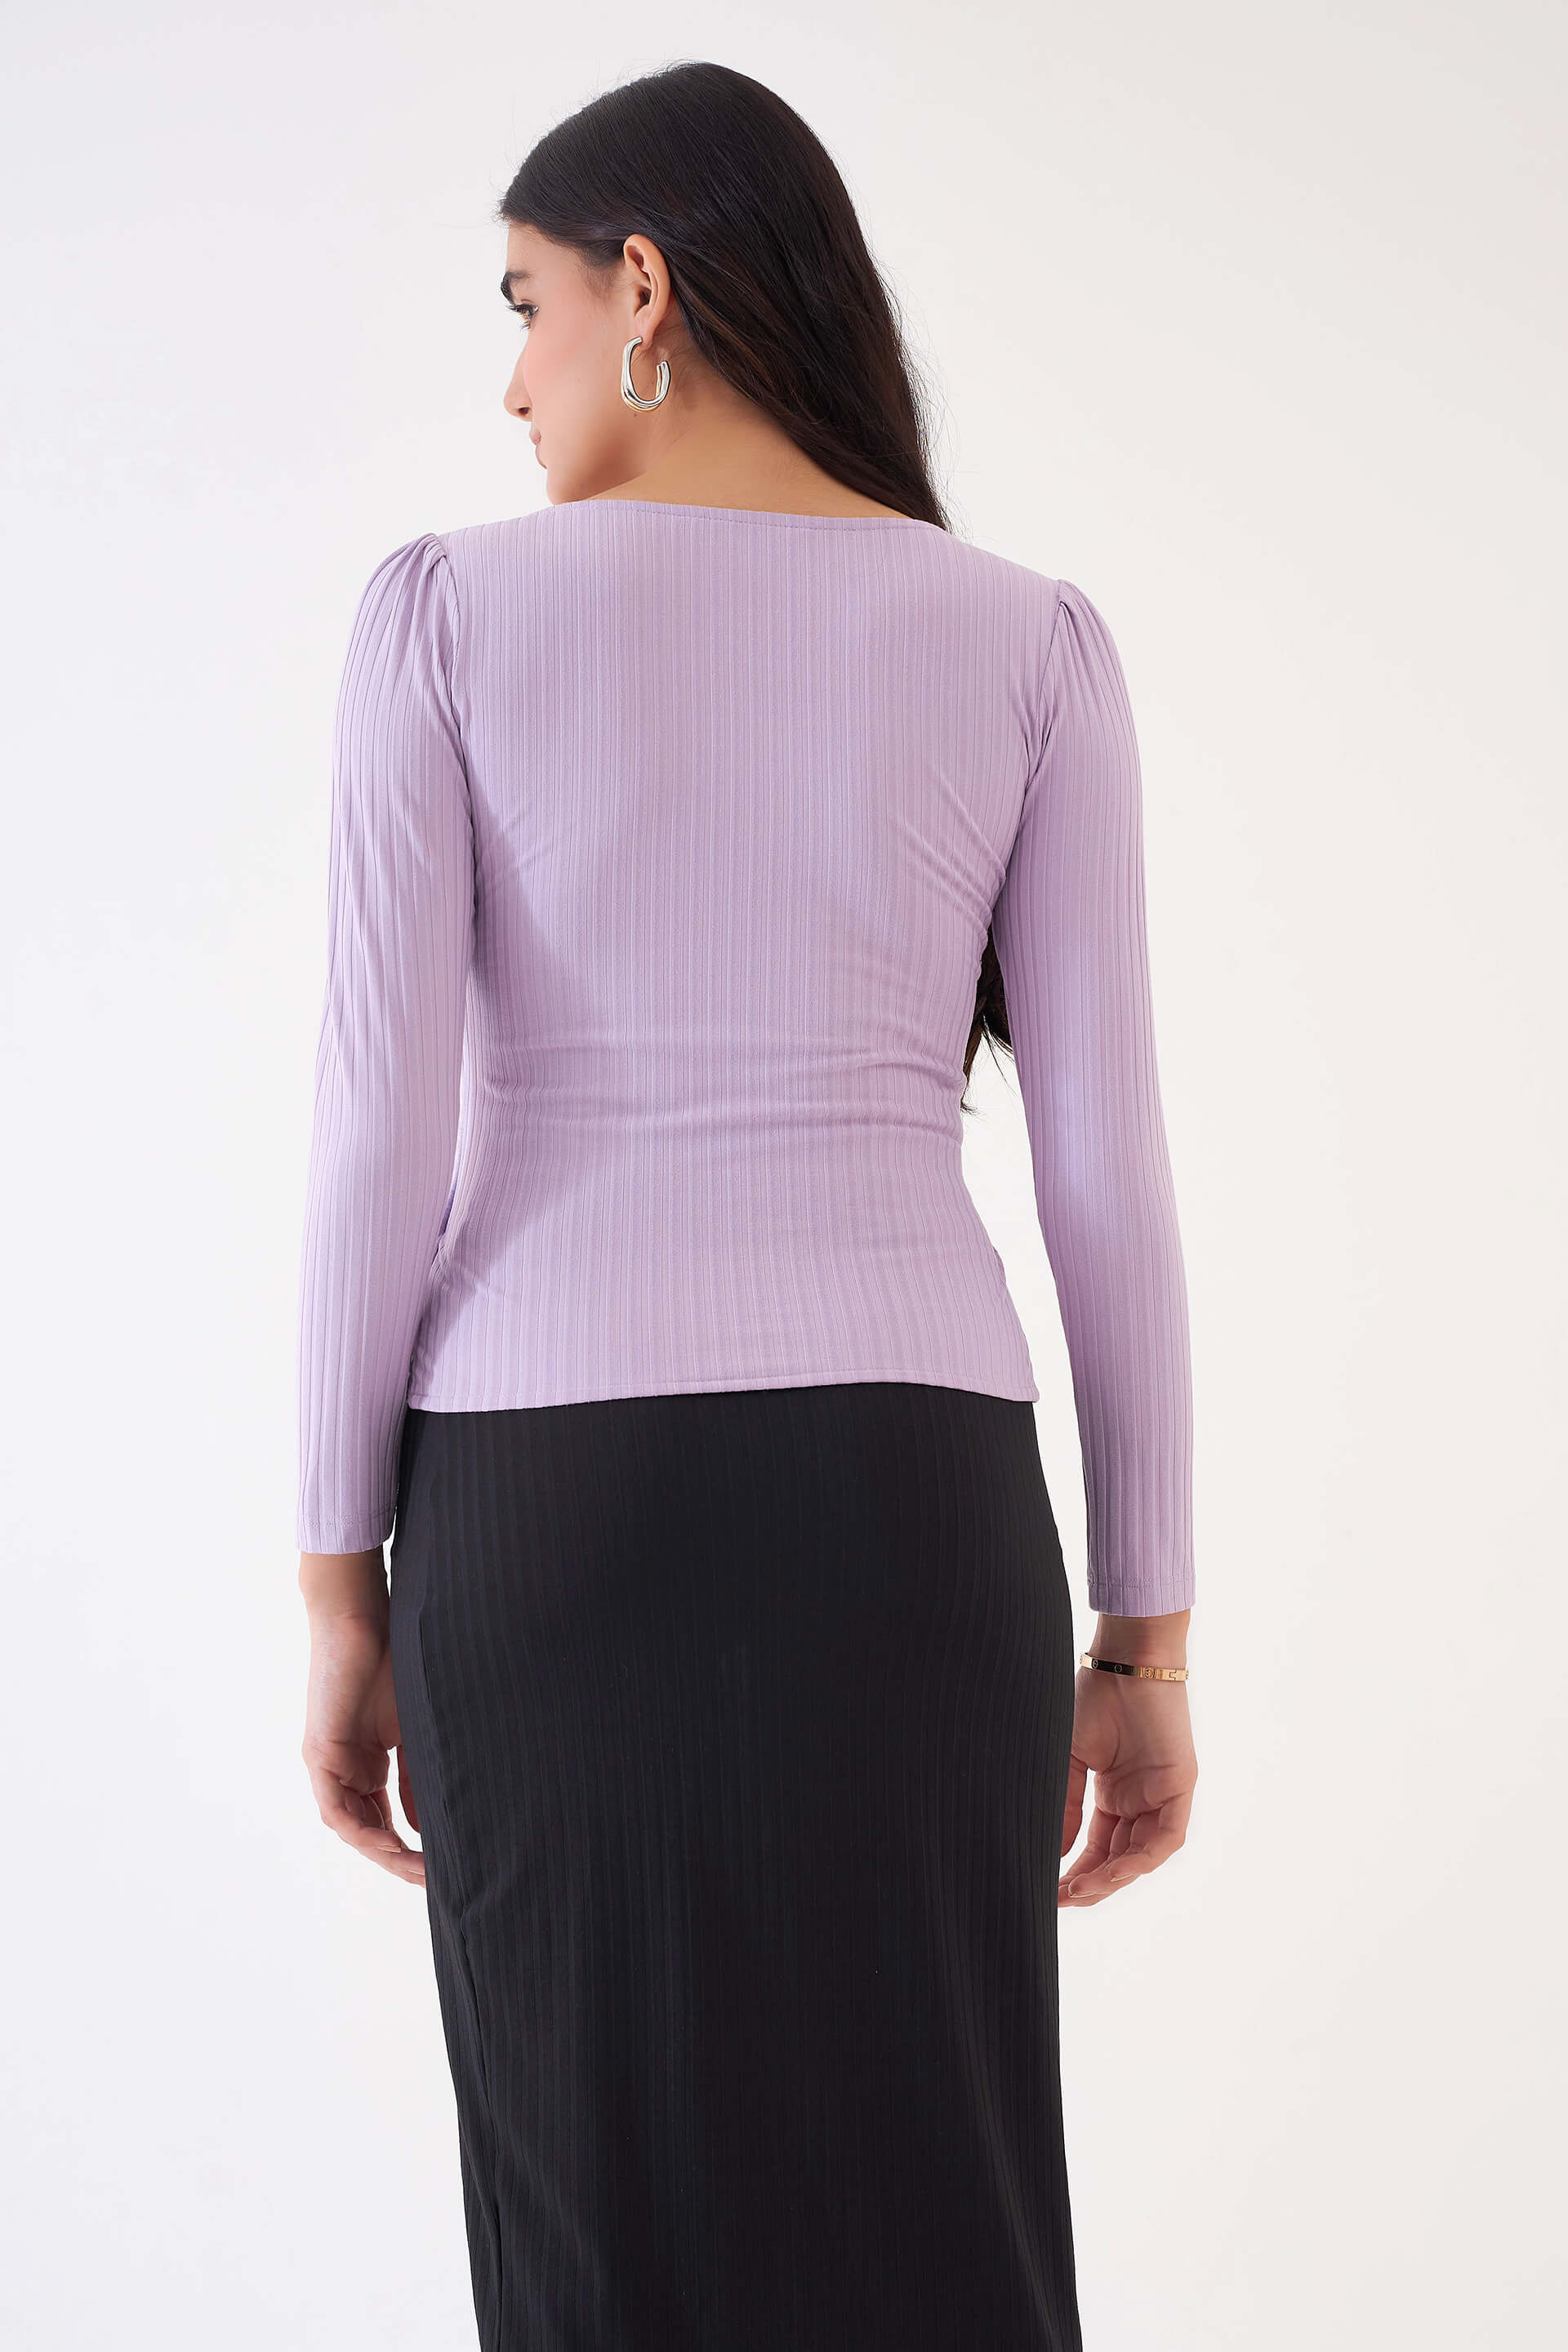 Cora Crossover Front Rib Knit Top - Lilac